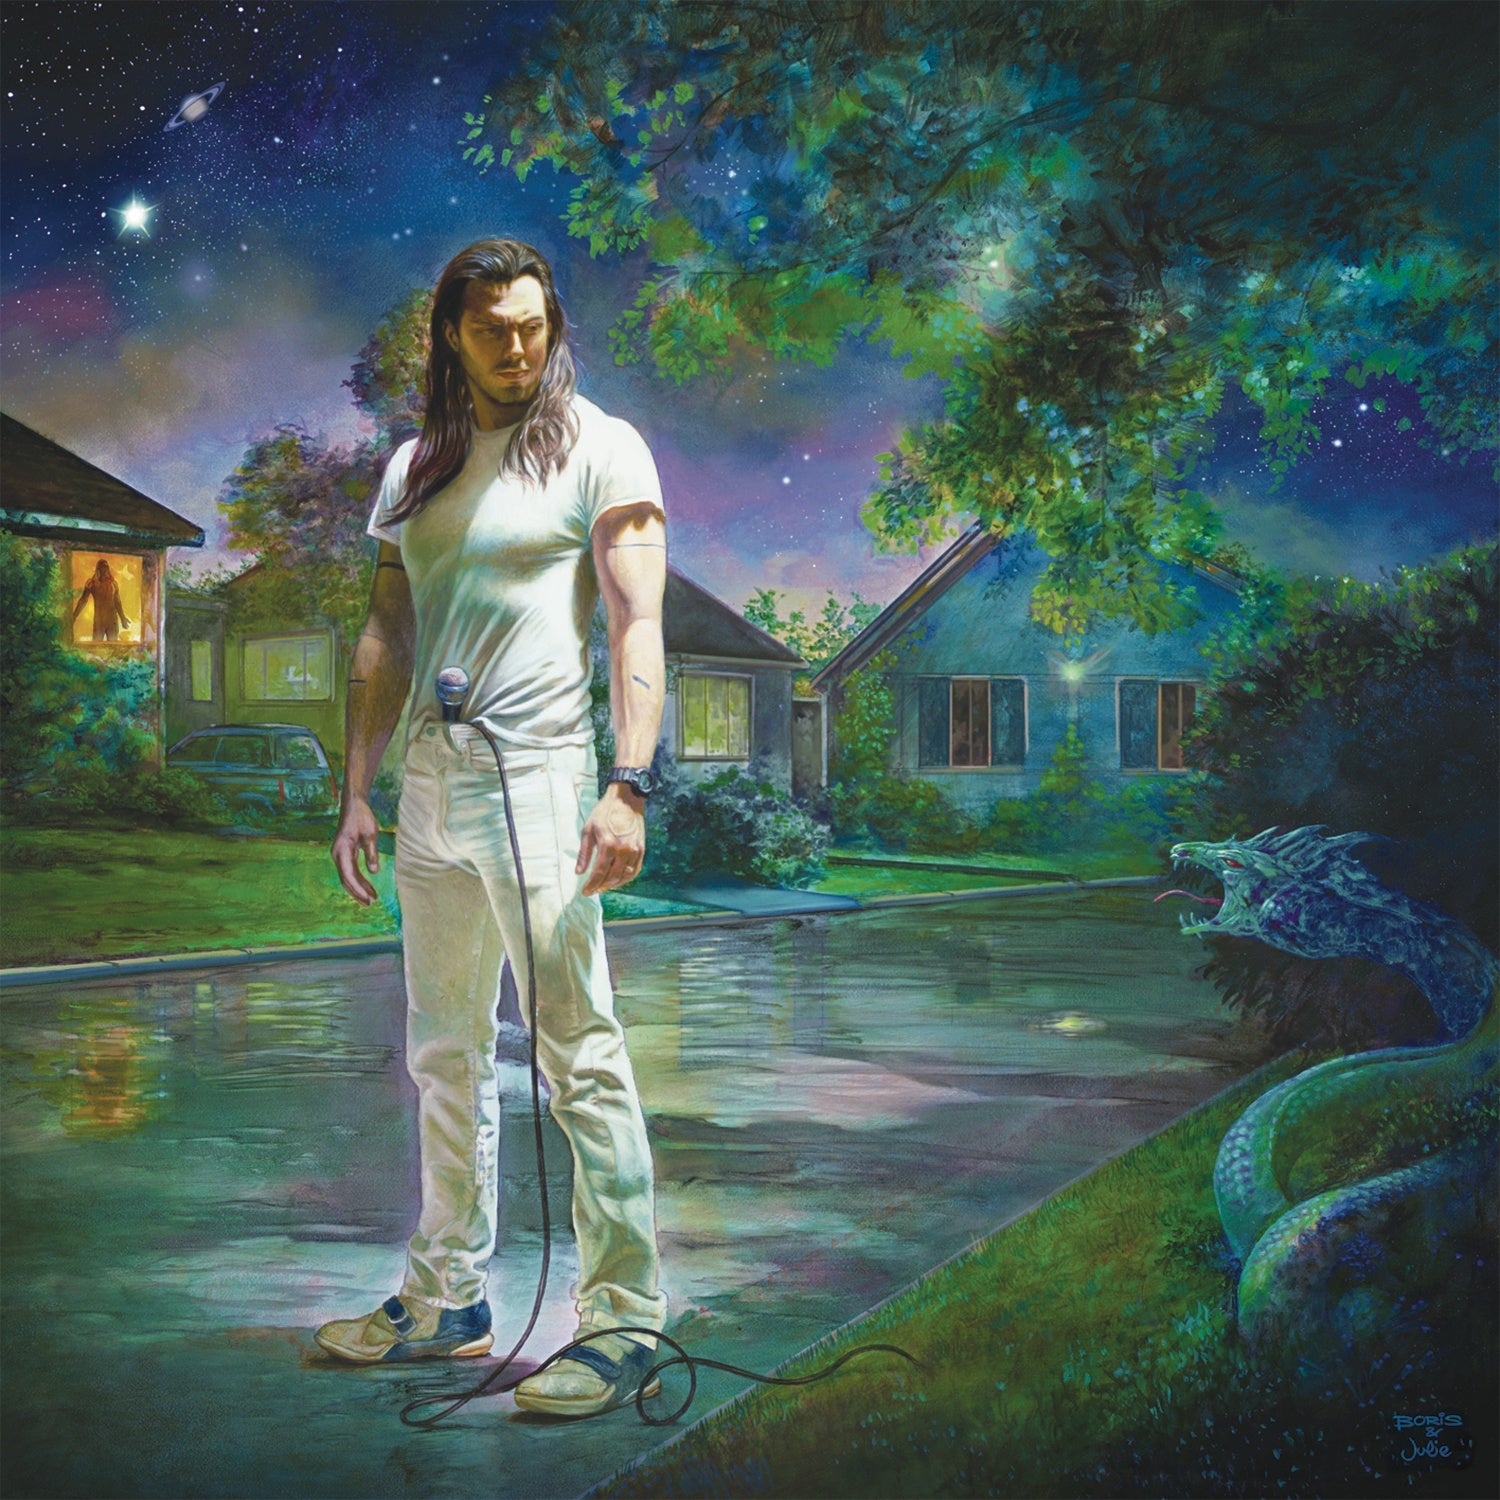 Signed Autograpghed - Andrew W.K. ‎– You're Not Alone - New 2 LP Record 2018 Red Music Blue & Green 180 gram Vinyl - Hard Rock